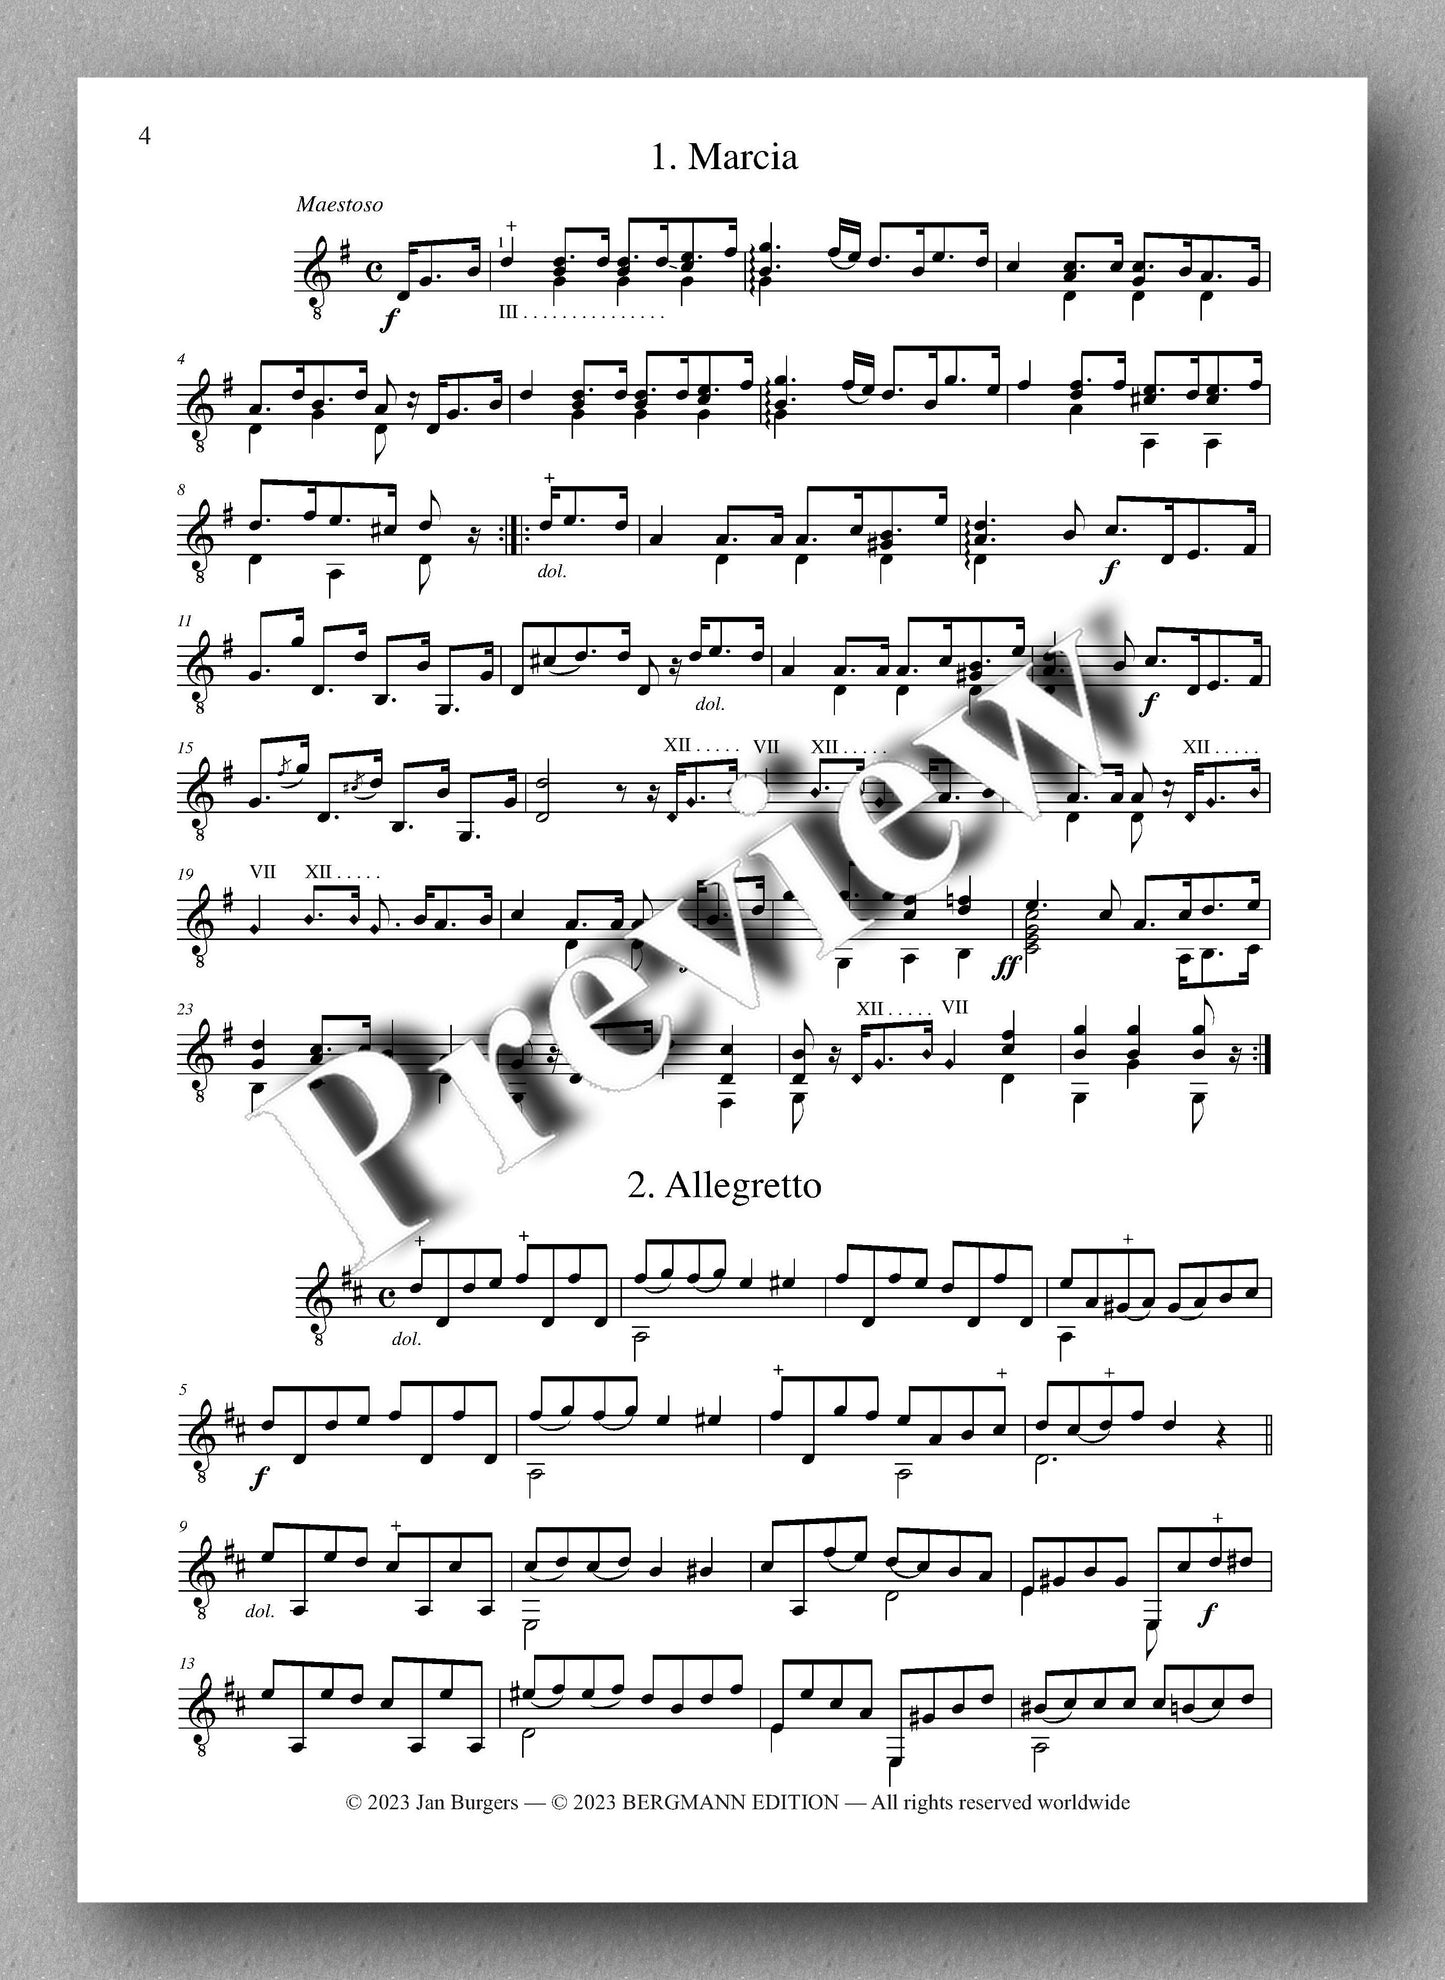 Molino, Collected Works for Guitar Solo, Vol. 25 - preview of the music score 1